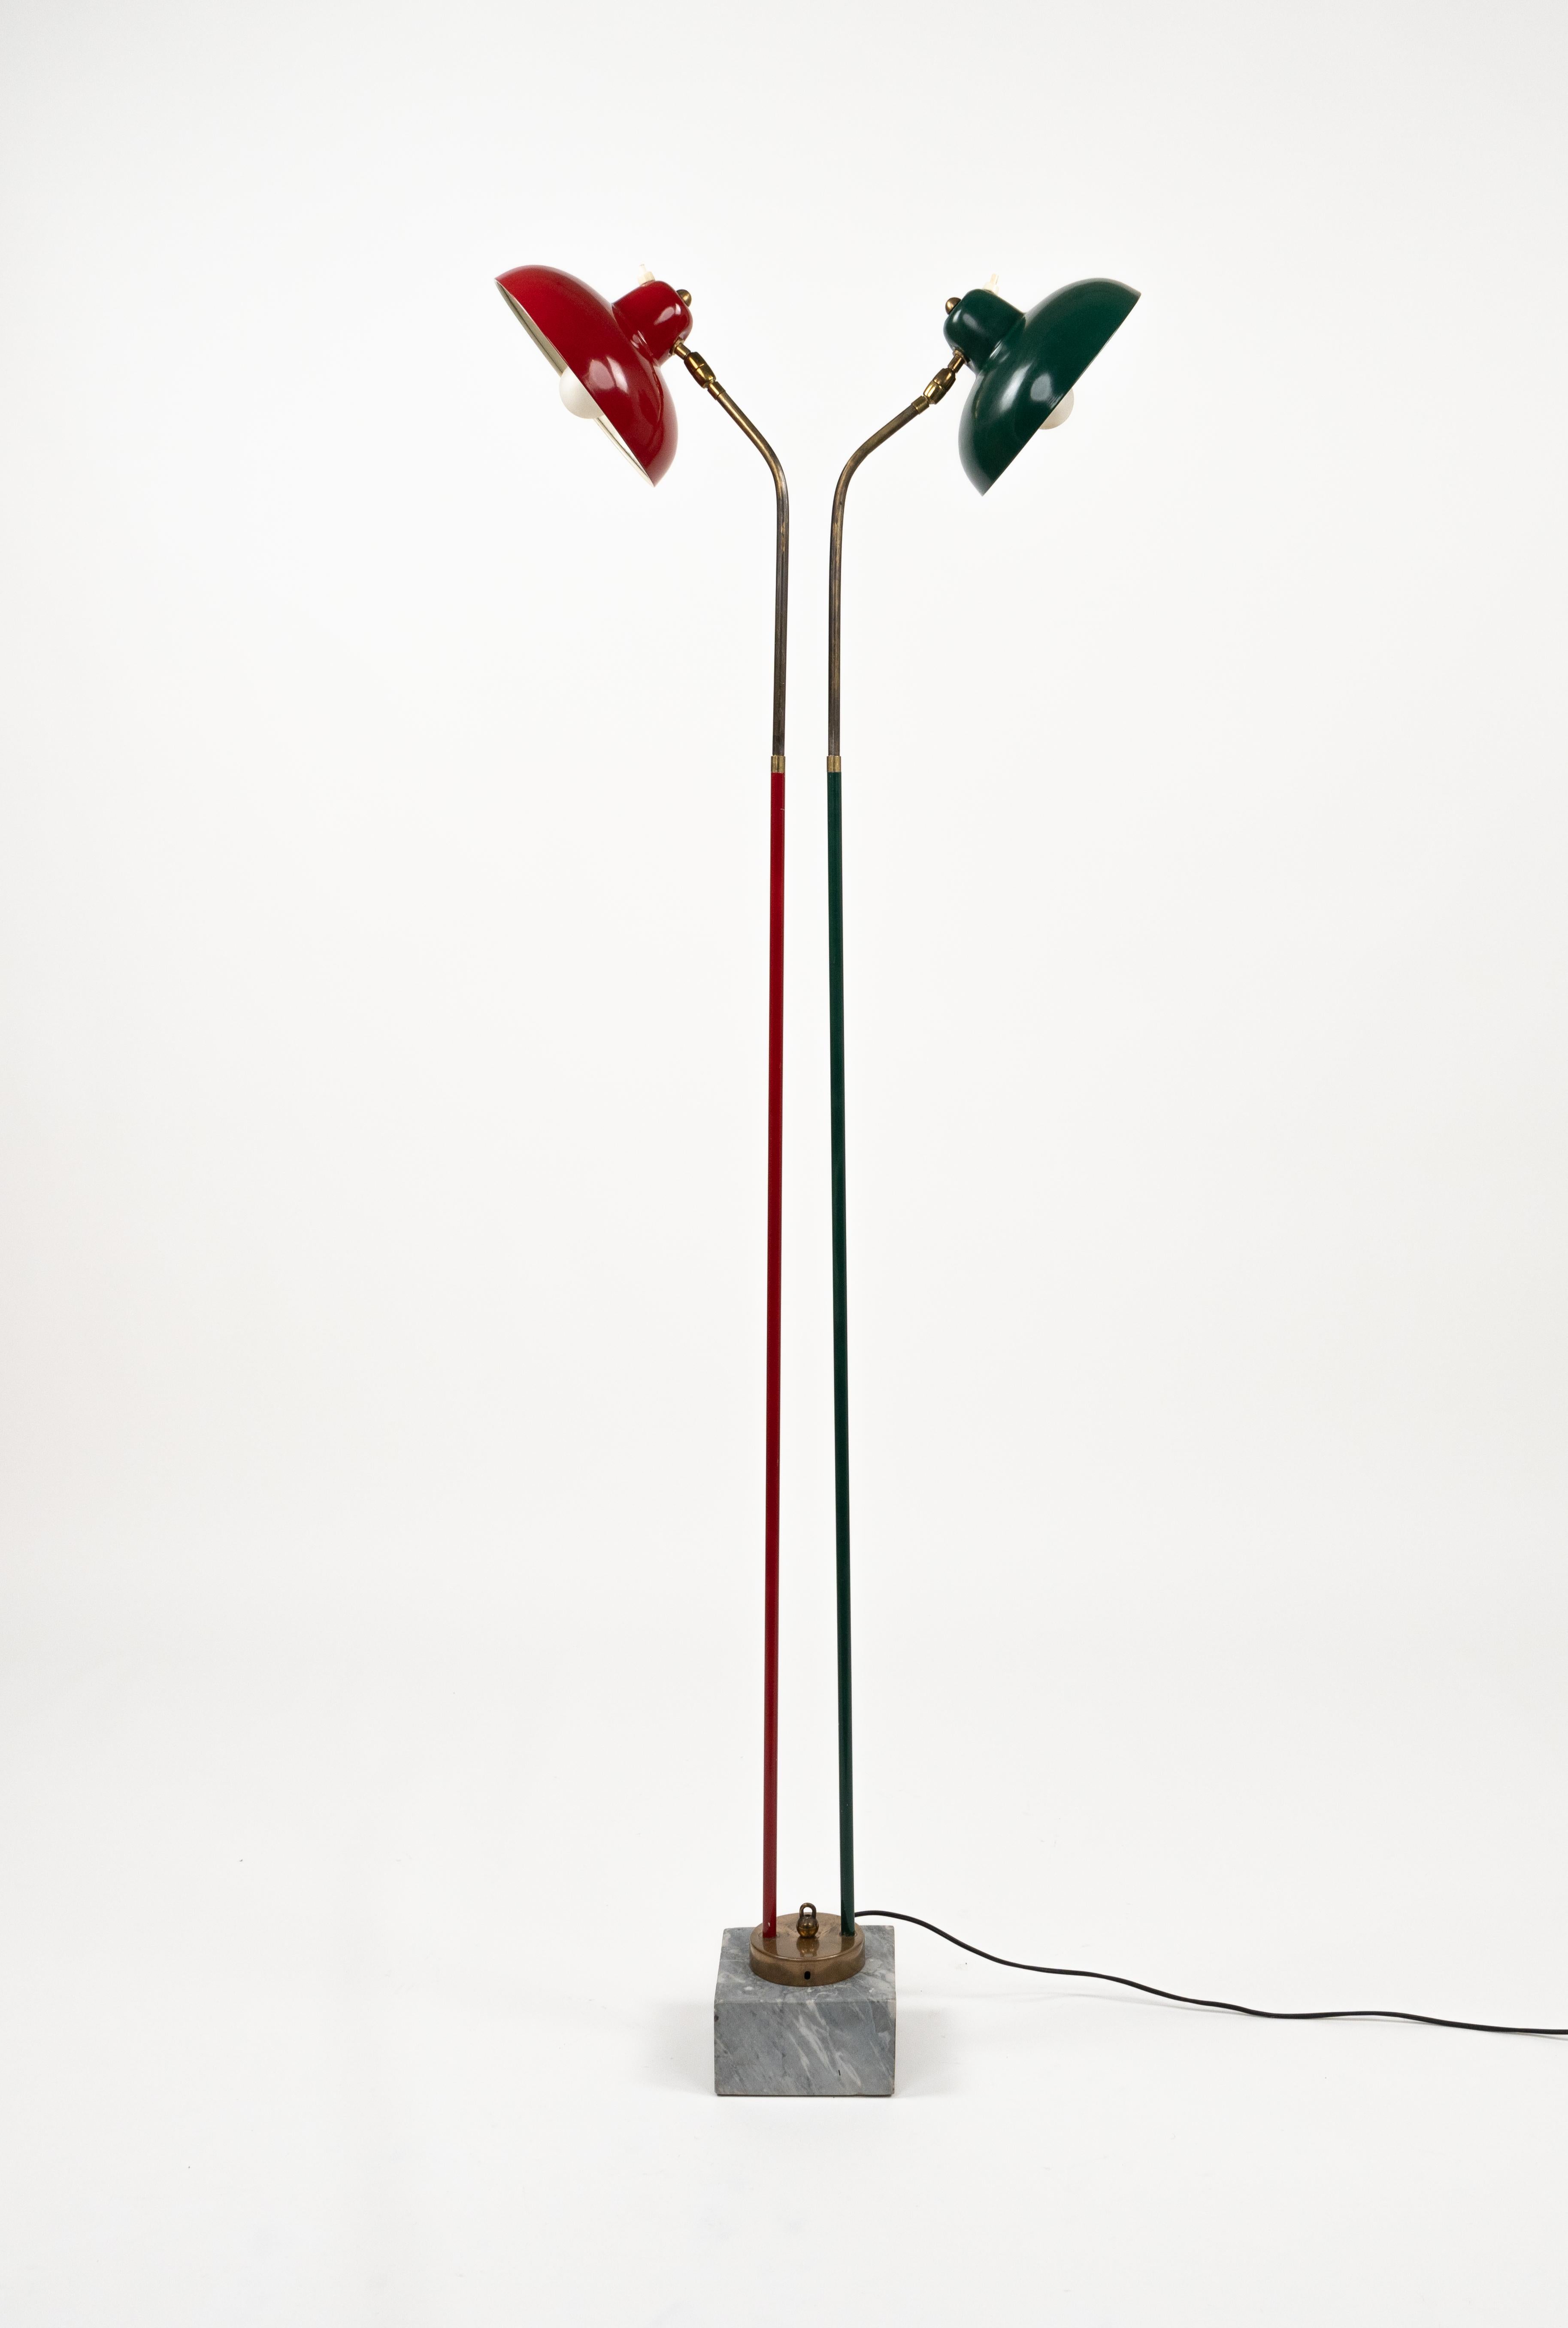 Floor Lamp in Marble, Lacquered Metal and Brass Stilnovo Style, Italy 1950s For Sale 1